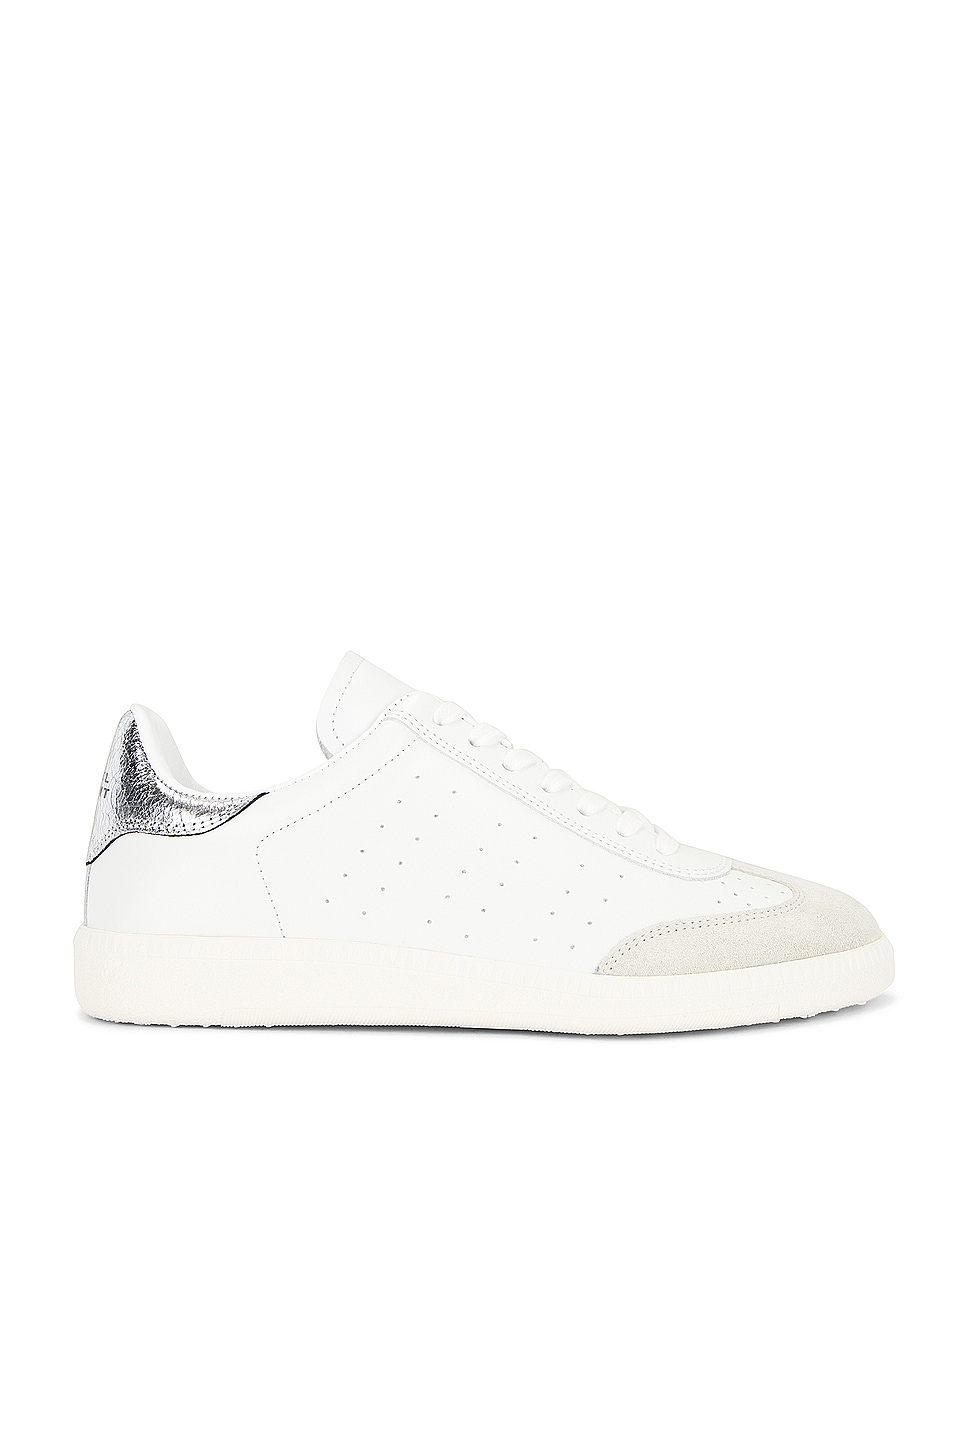 Image 1 of Isabel Marant Bryce Sneaker in Silver